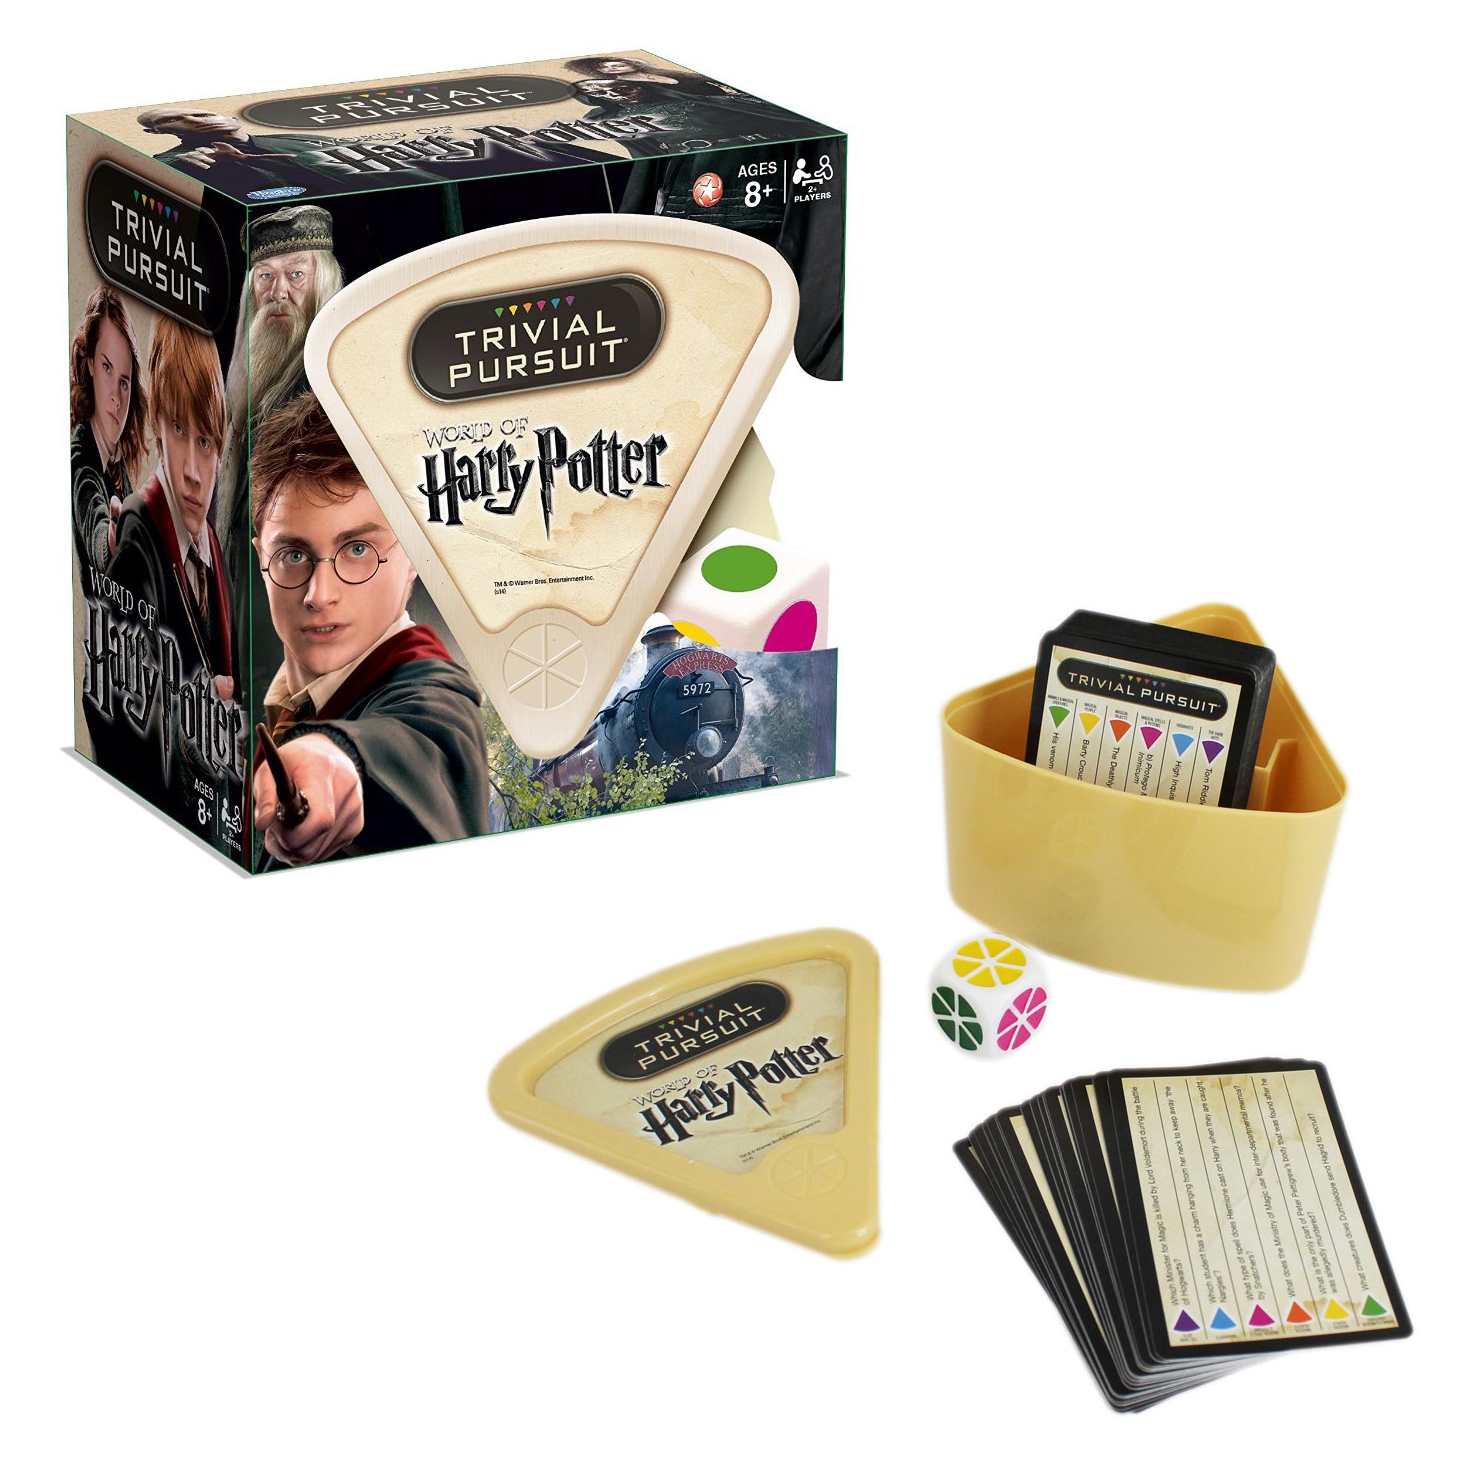 World of Harry Potter 'Trivial Pursuit' Card Game